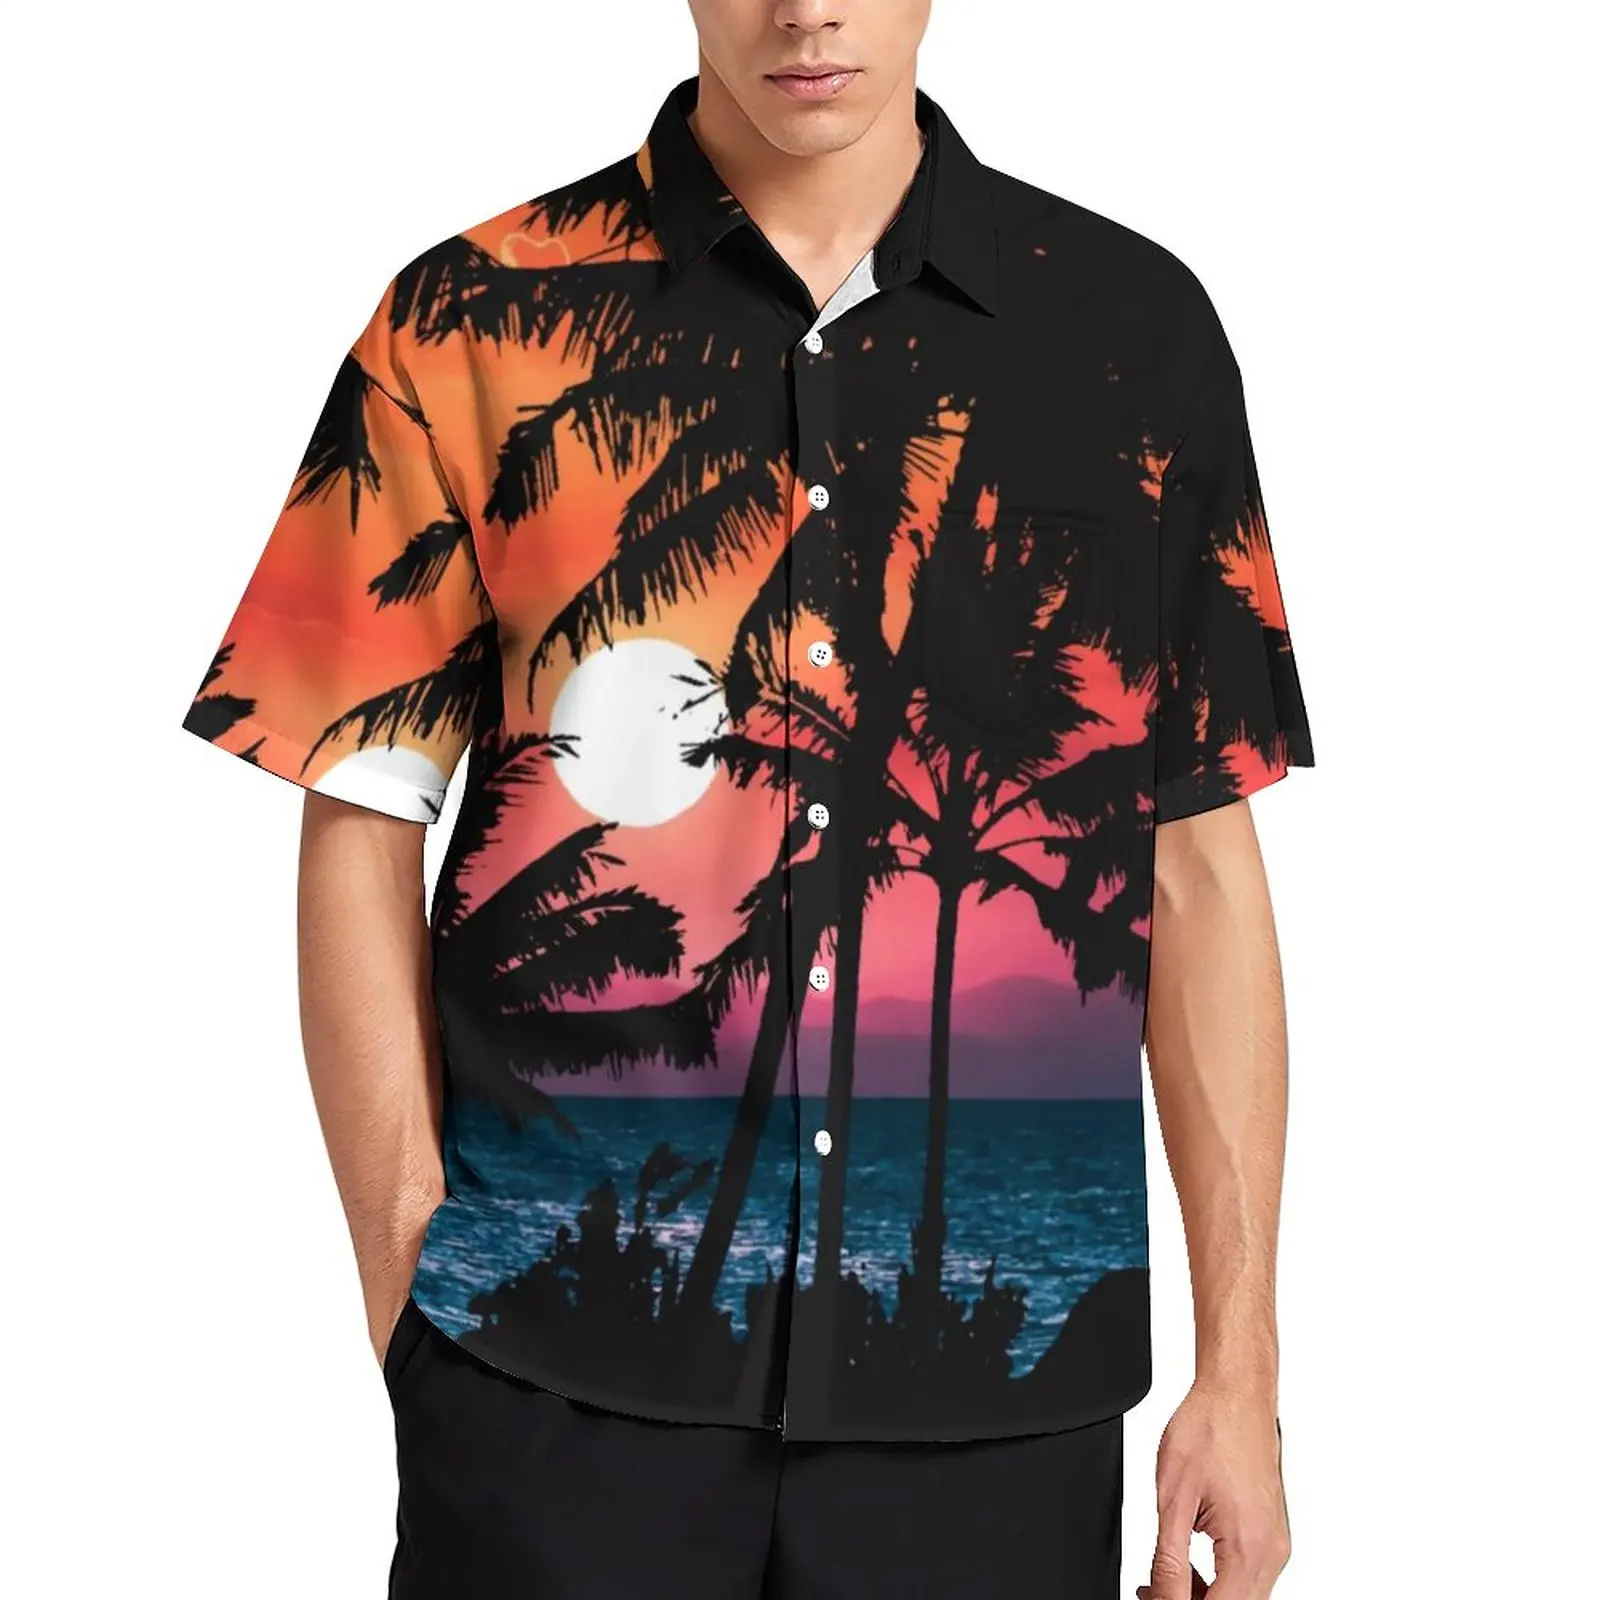 

Summer Sunset Beach Shirt Tropical Palm Trees Summer Casual Shirts Male Trending Blouses Short-Sleeve Pattern Clothing Big Size